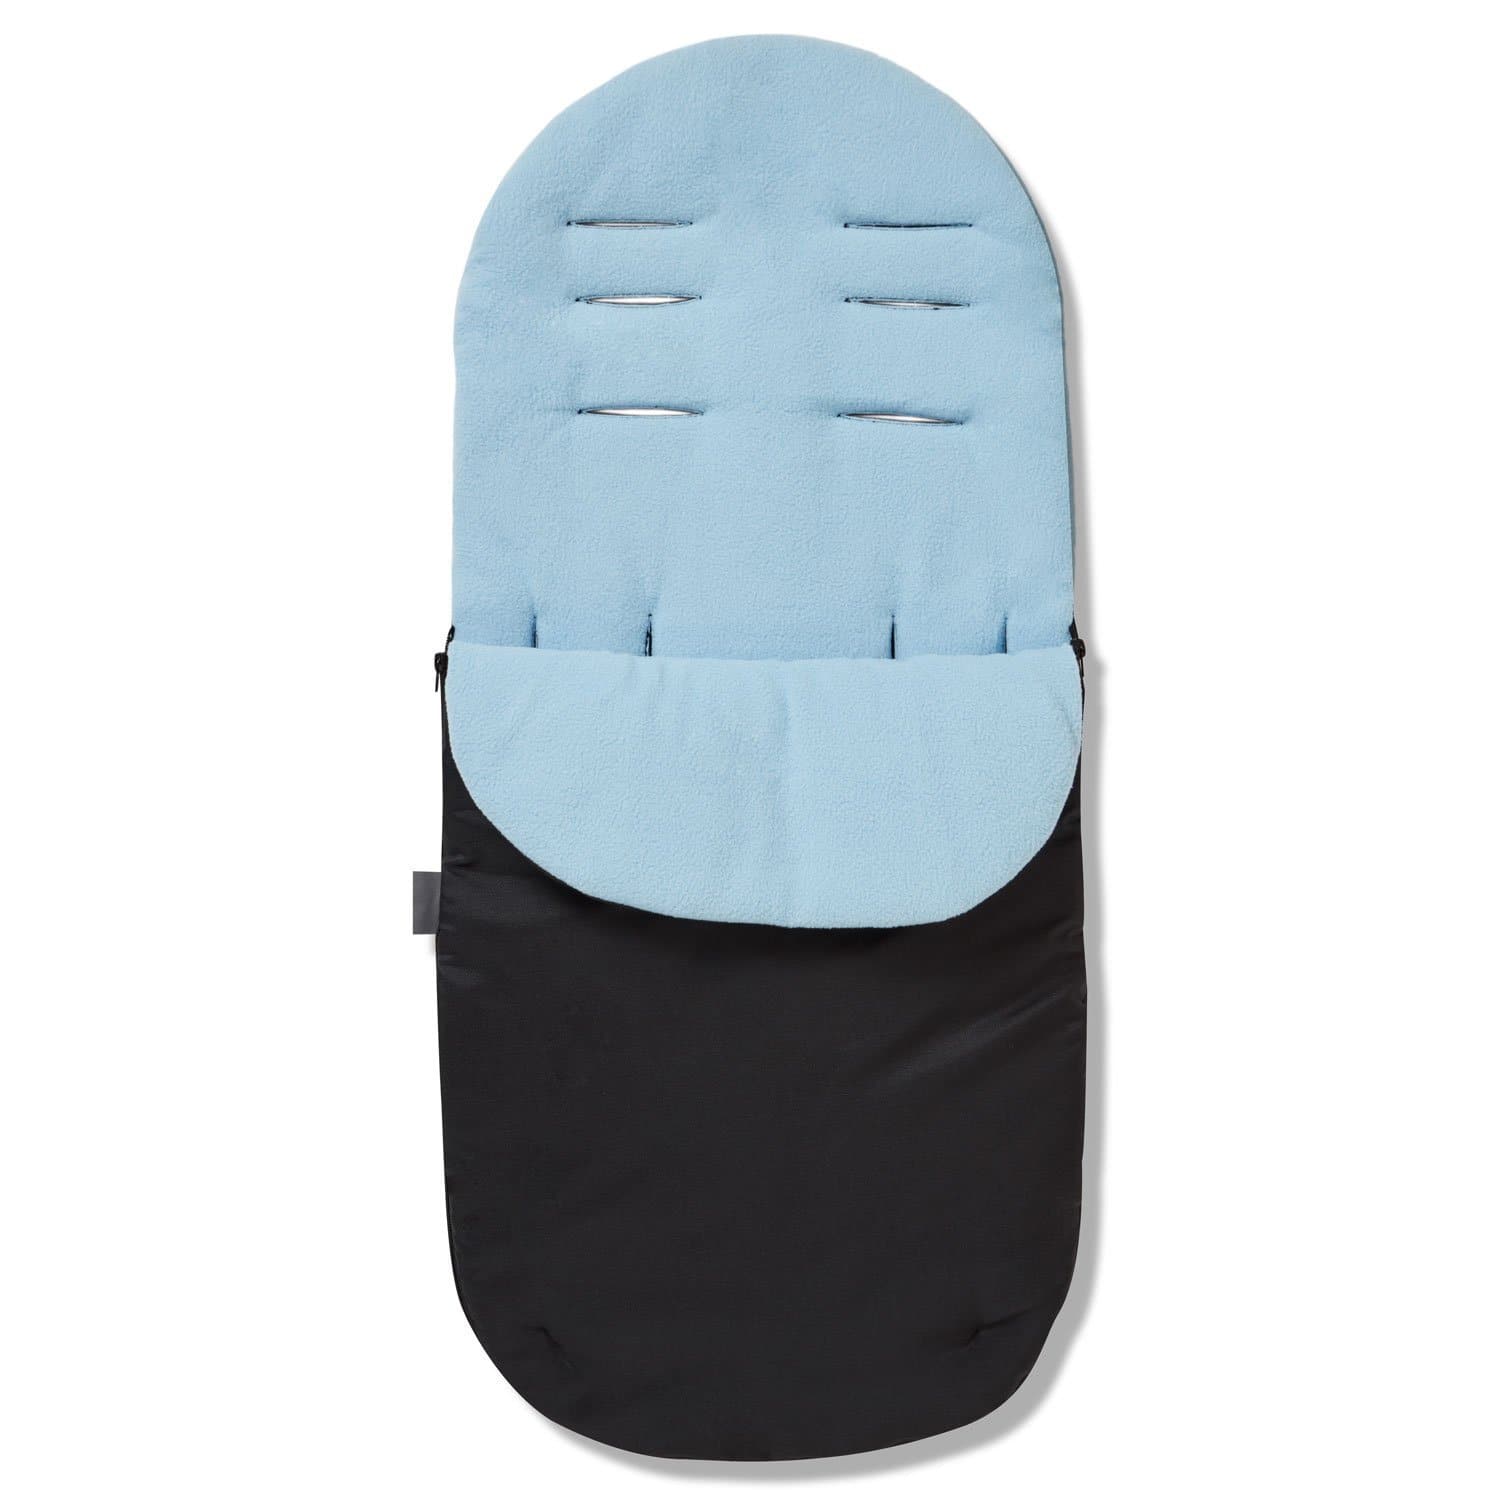 Footmuff / Cosy Toes Compatible with Babyzen - Light Blue / Fits All Models | For Your Little One